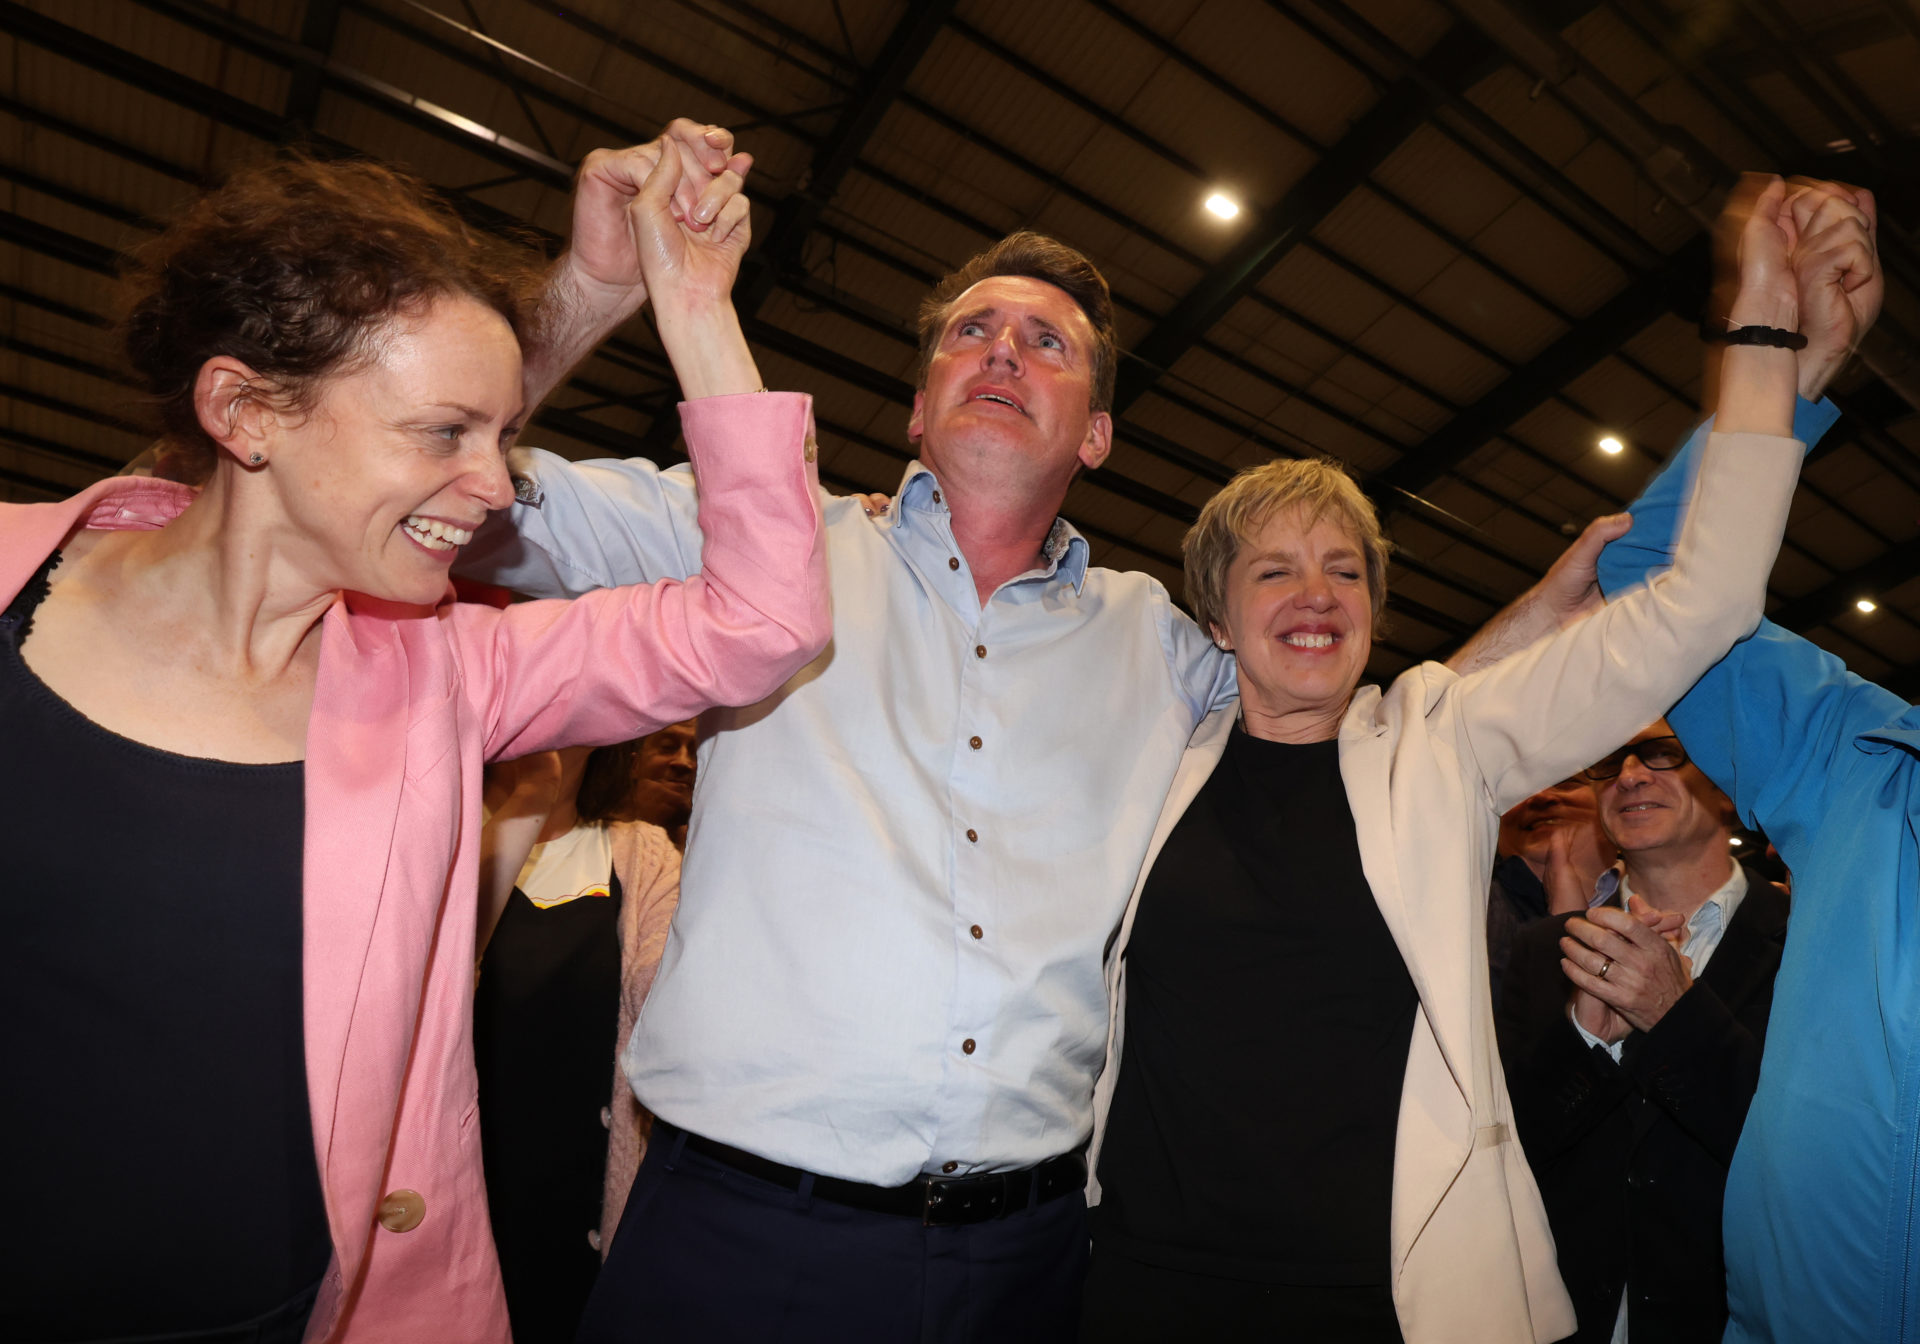 Labour's Aodhán Ó Ríordáin (centre) celebrates after winning a seat during results for the European elections at the RDS count centre in Dublin, 11-6-24.